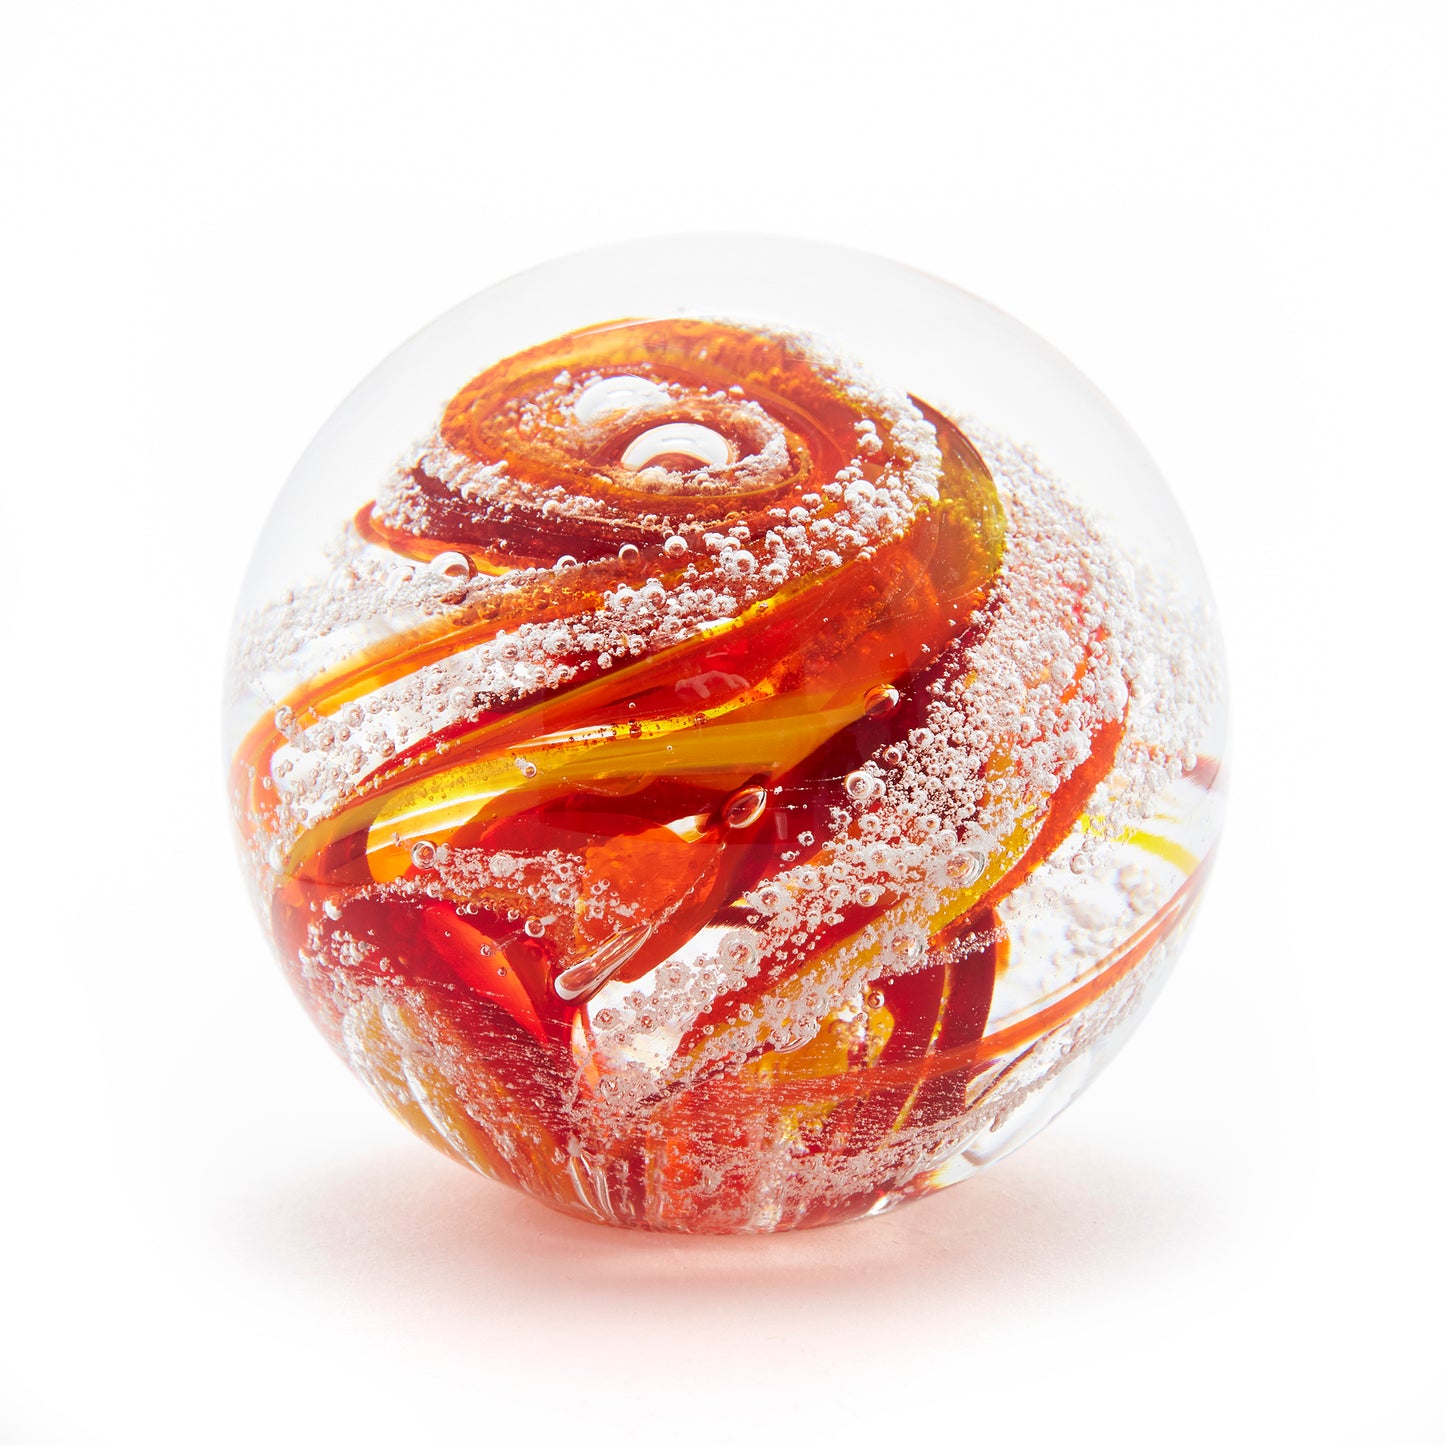 Round memorial glass art paperweight with cremation ash. Red, yellow, and orange glass. Colour combination is called "Sunburst."